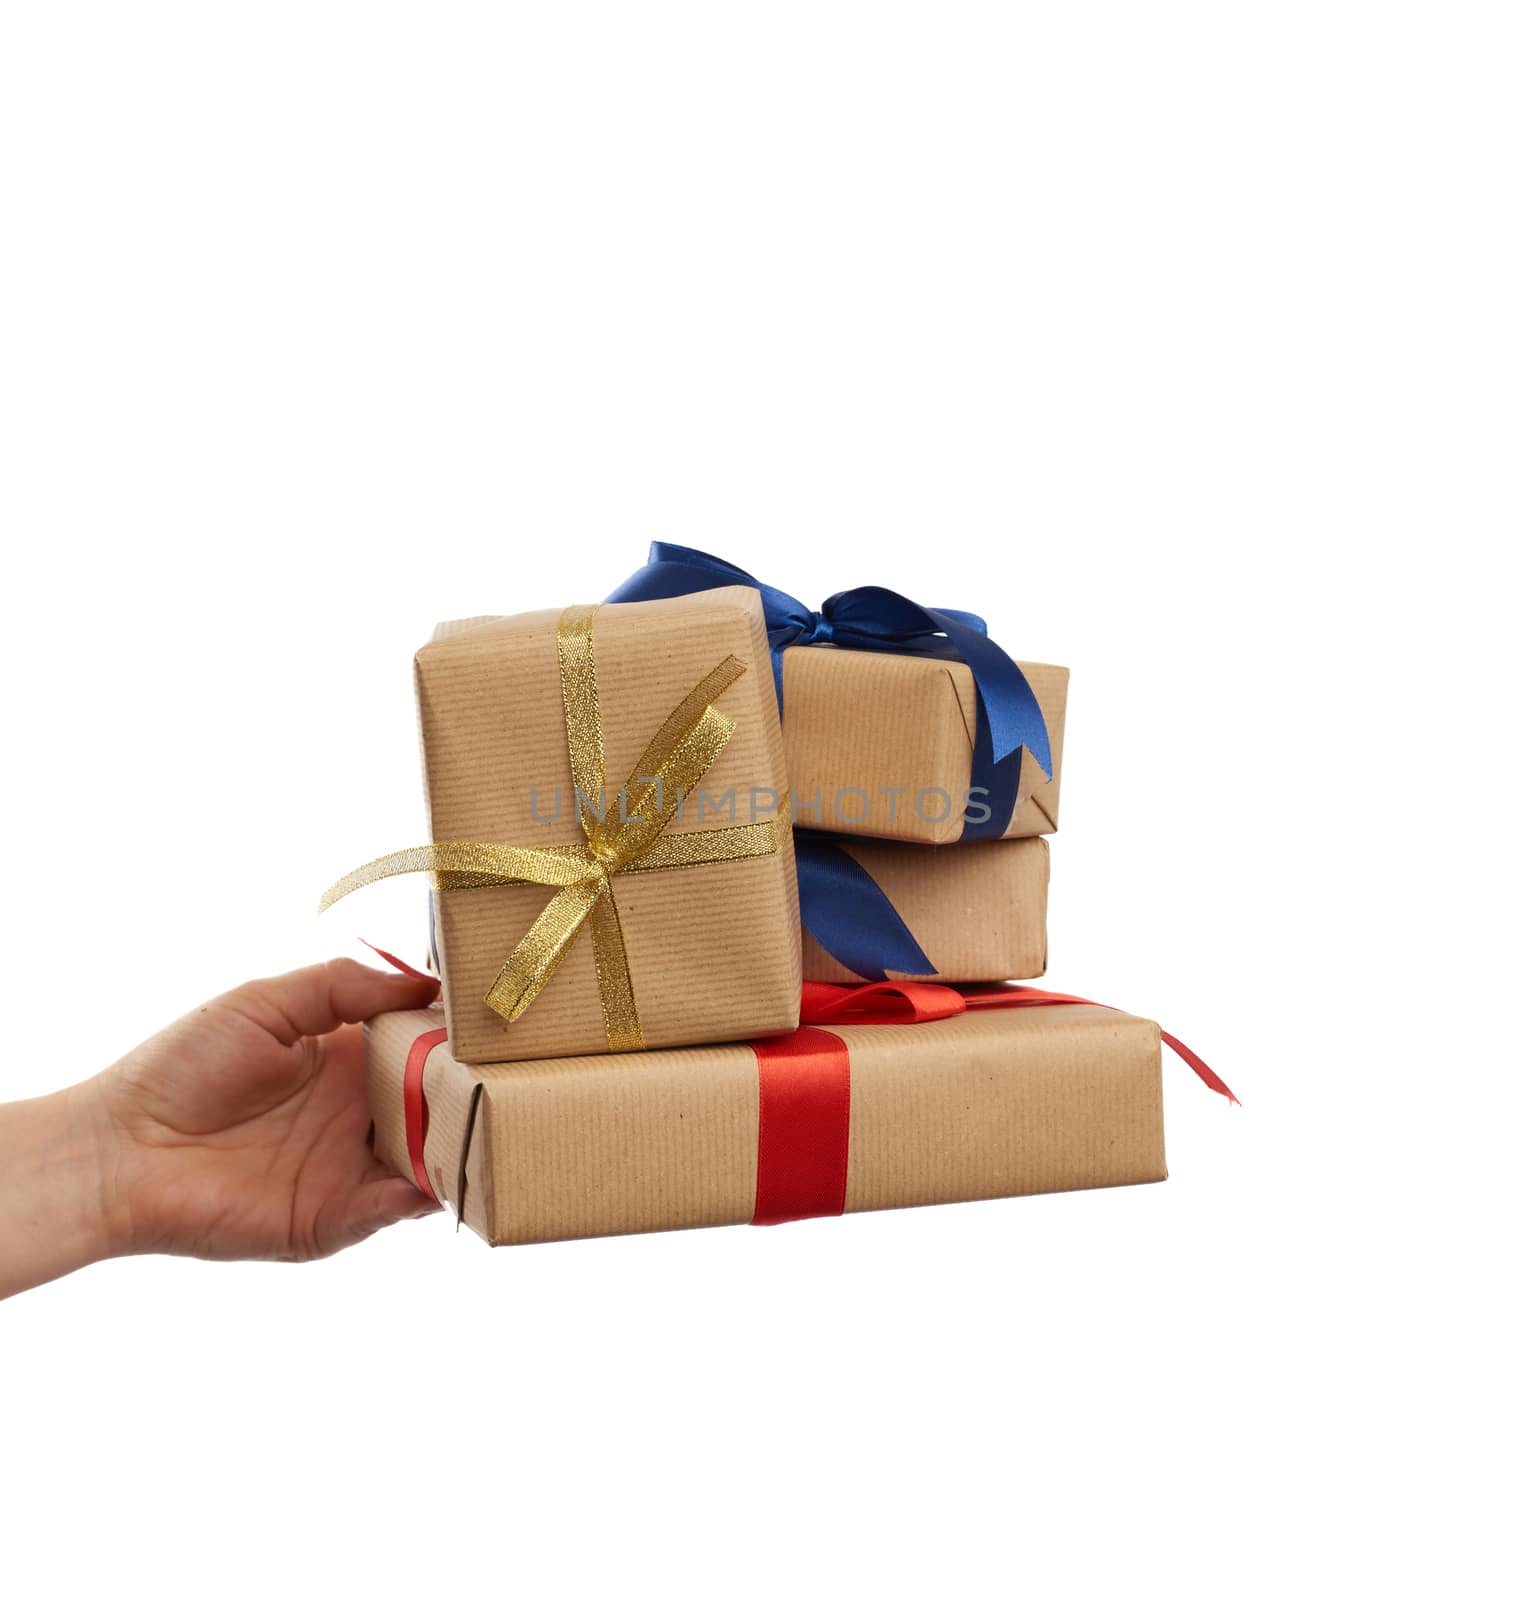 hand holds a stack of wrapped gifts in brown craft paper with tied silk bows, subject is isolated on a white background